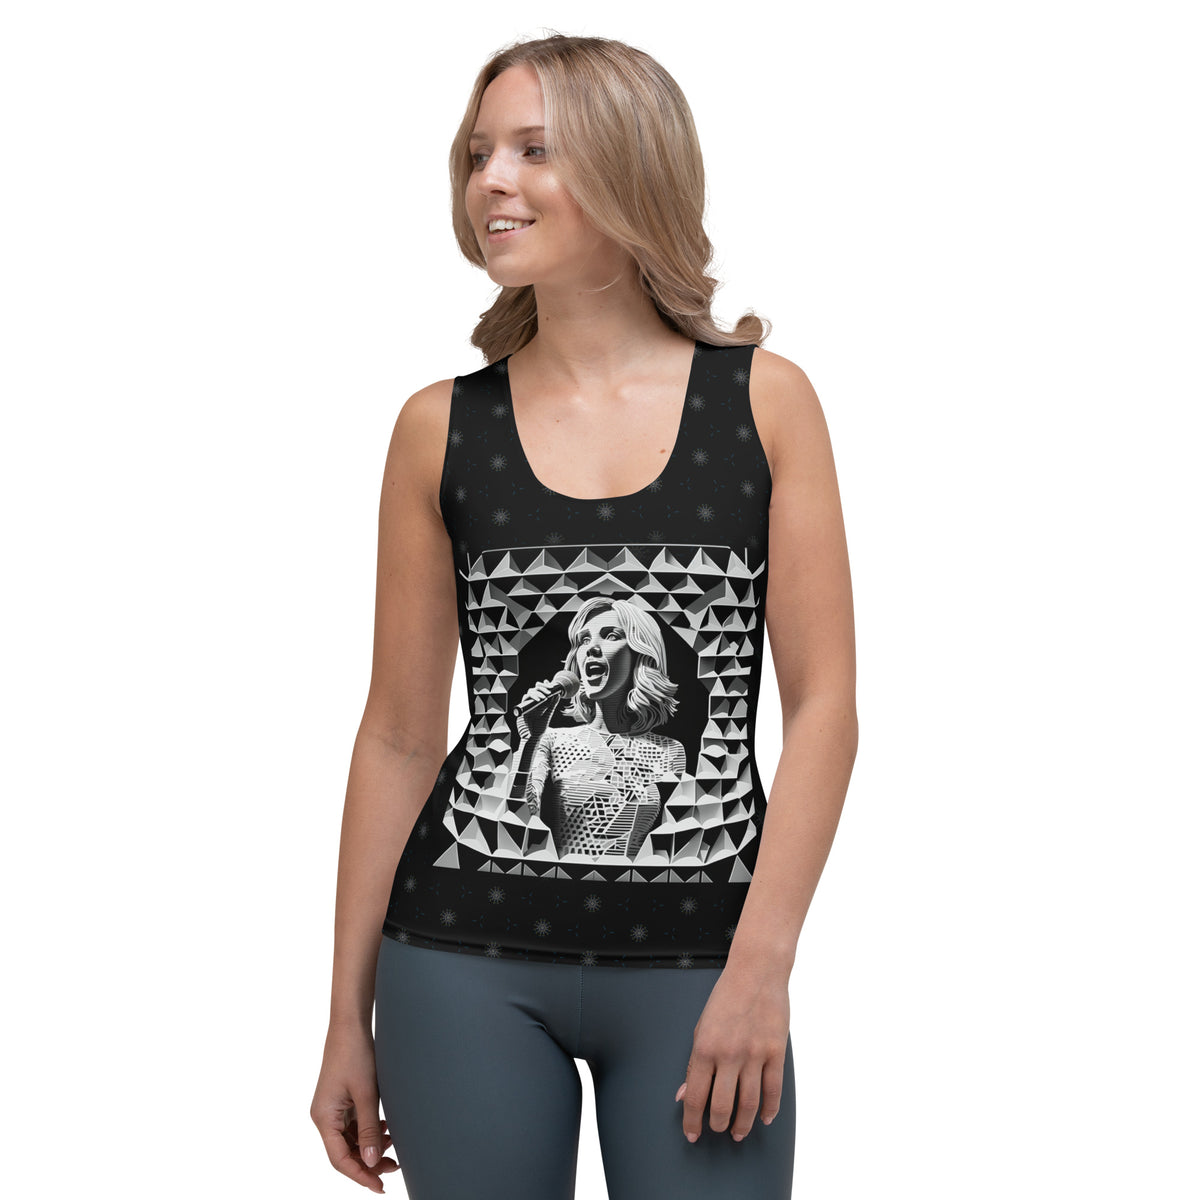 Greatest Equestrian All-Over Print Women's Tank Top